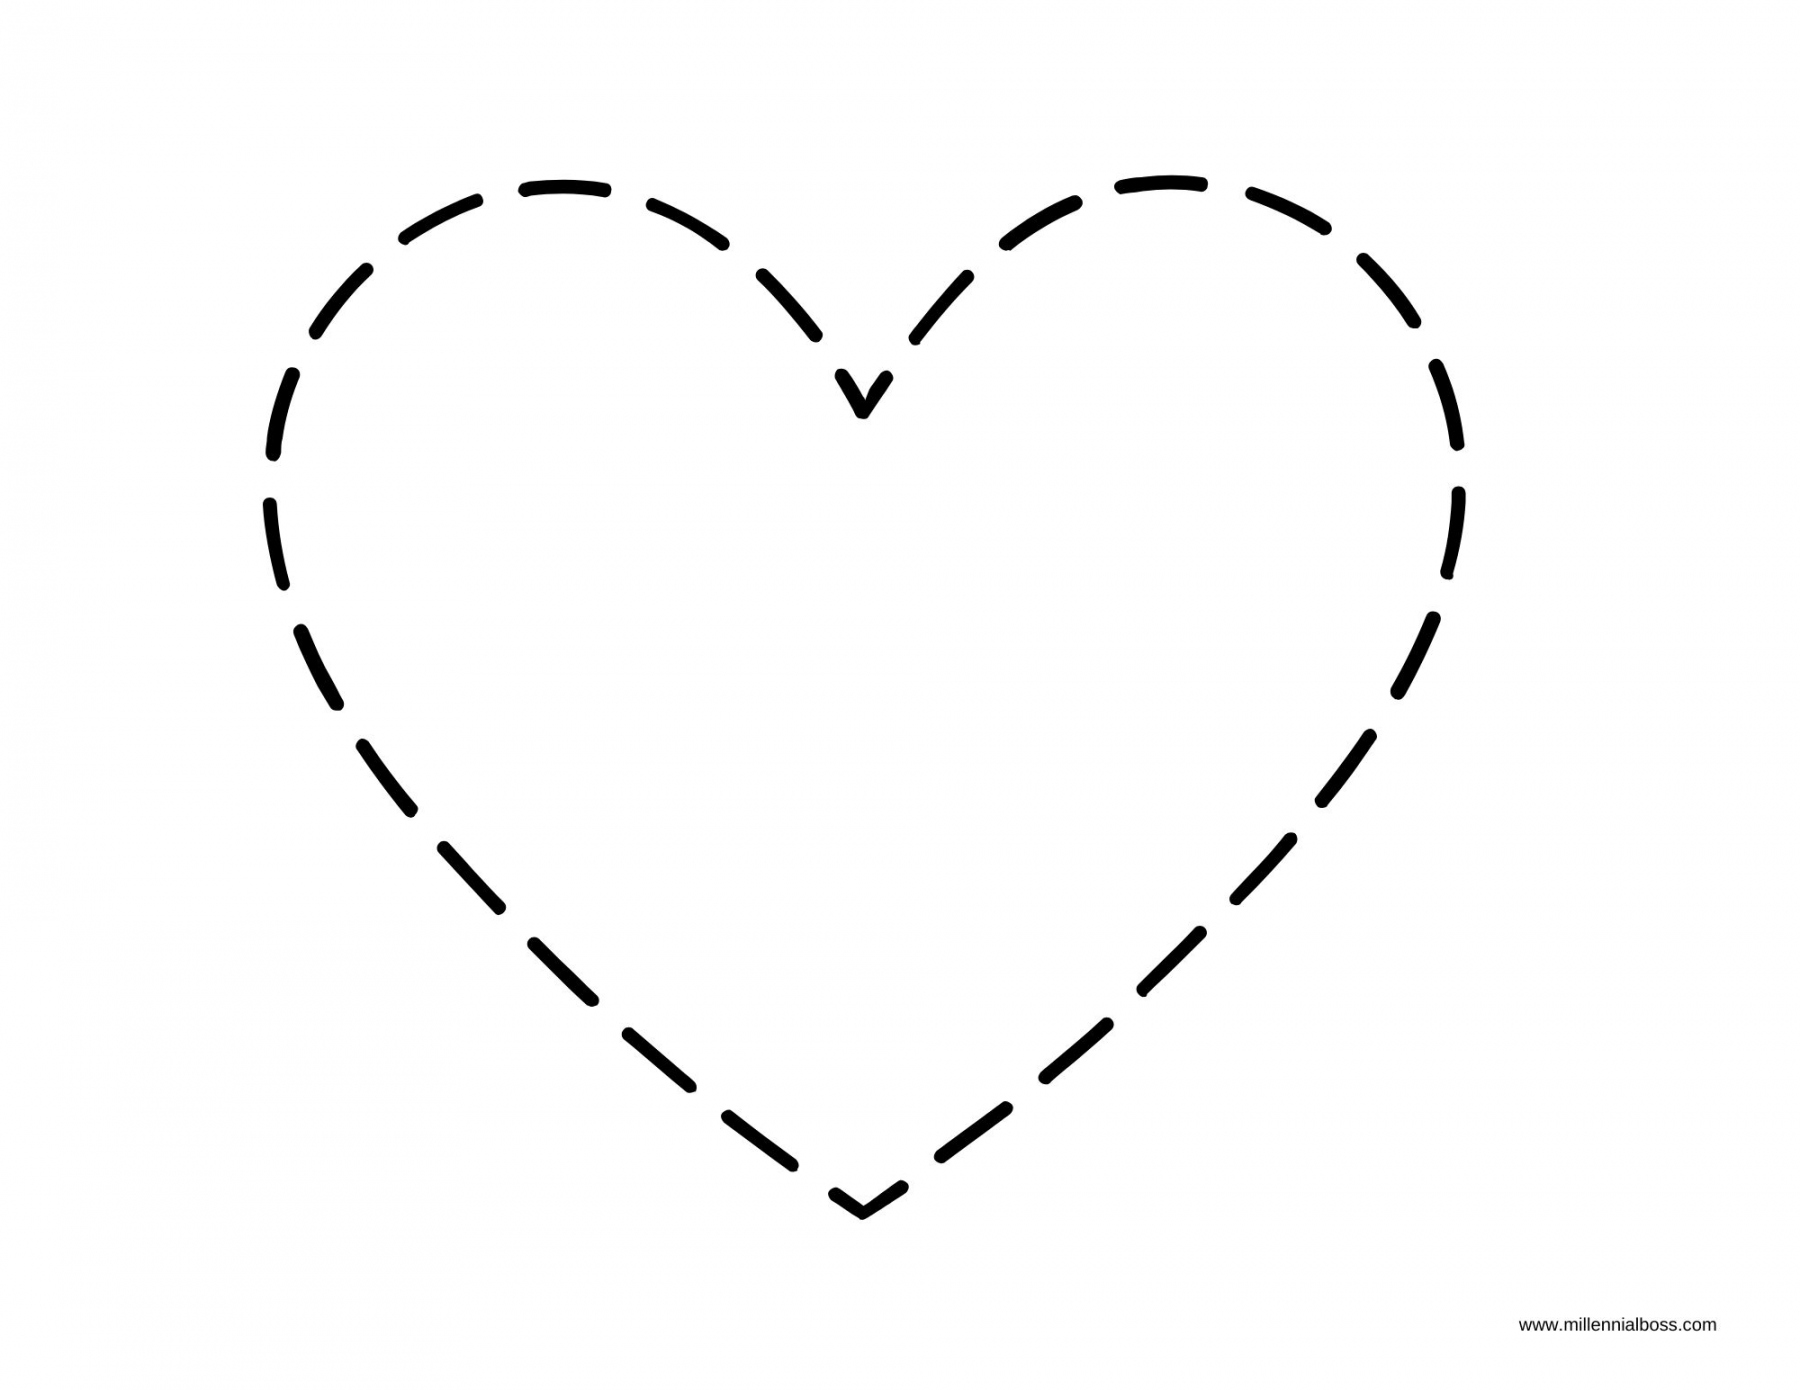 Free Printable Heart Template - Printable - Free Heart Templates pdf in all different sizes